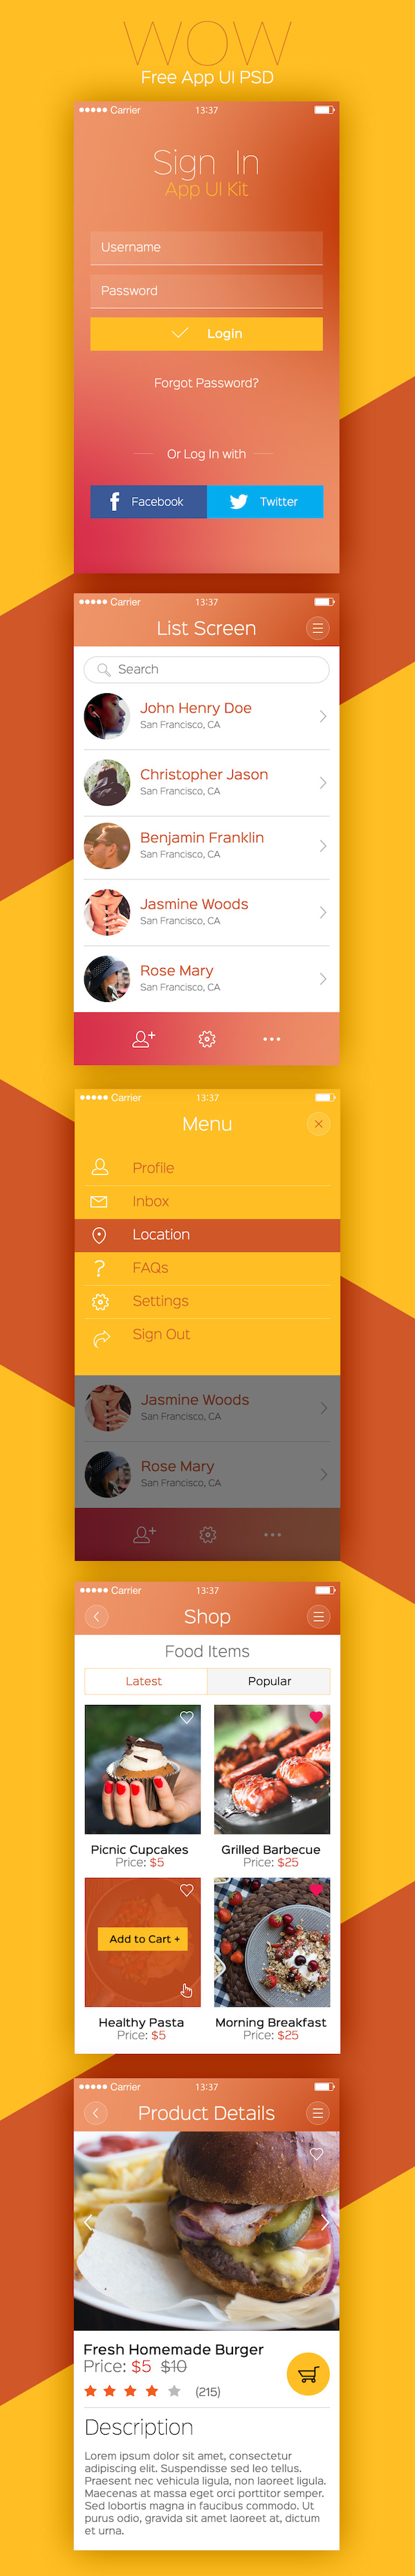 Free Mobile App Design Template Images